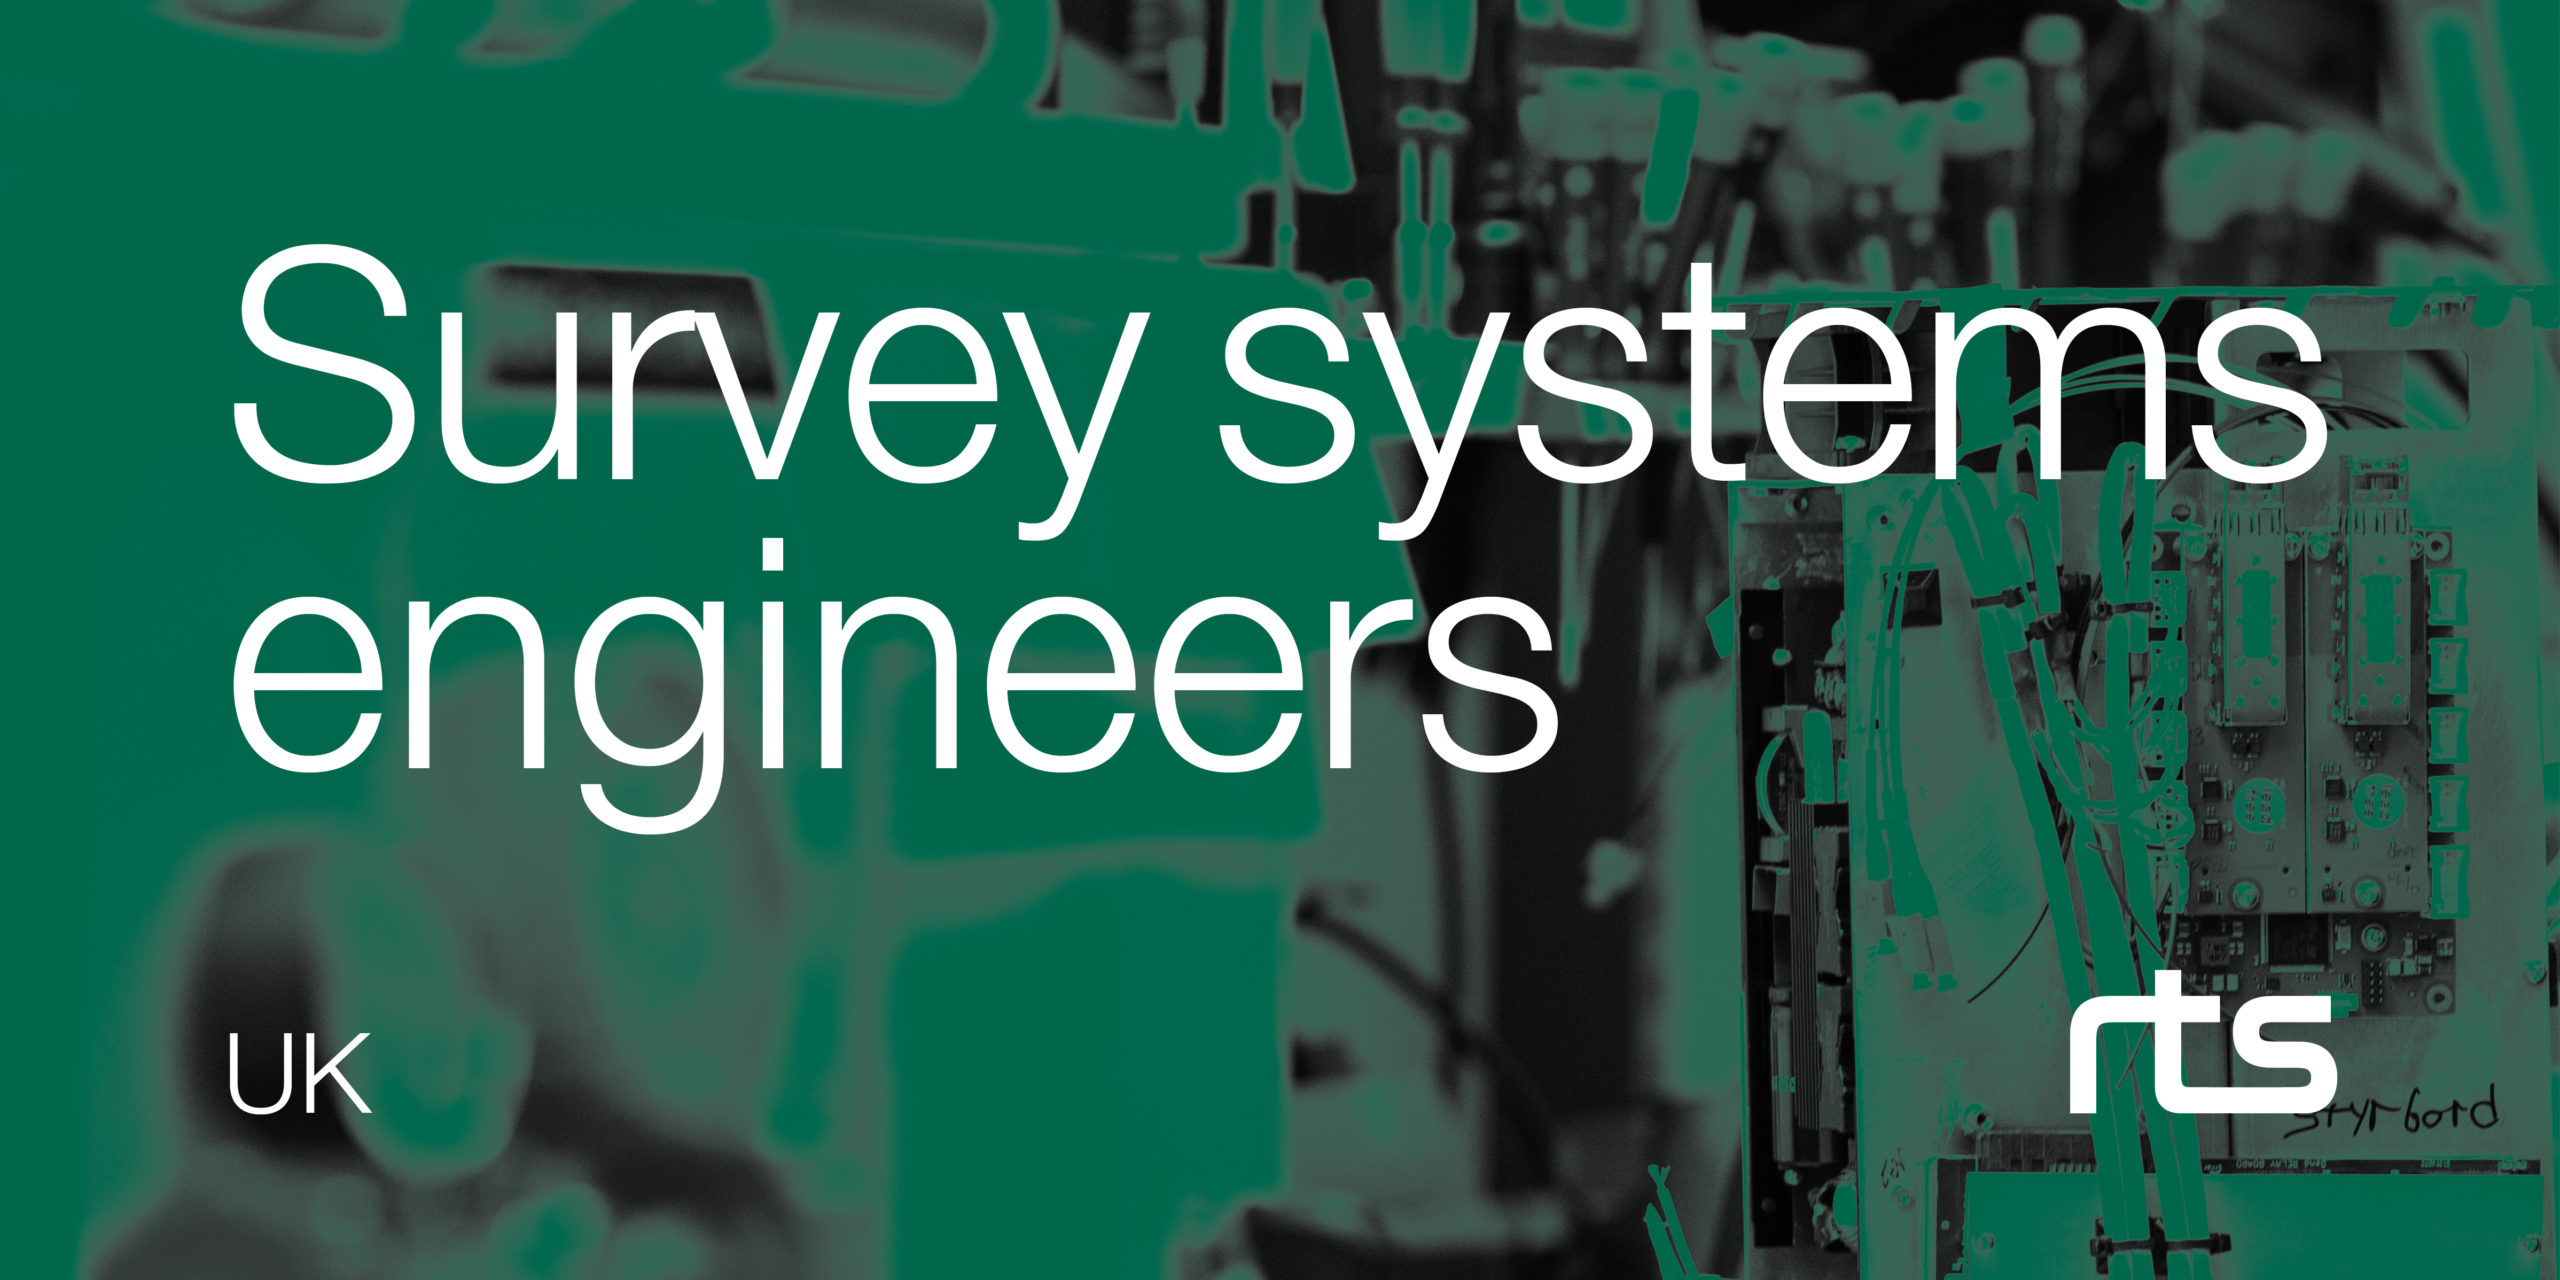 Survey Systems Engineers (UK)